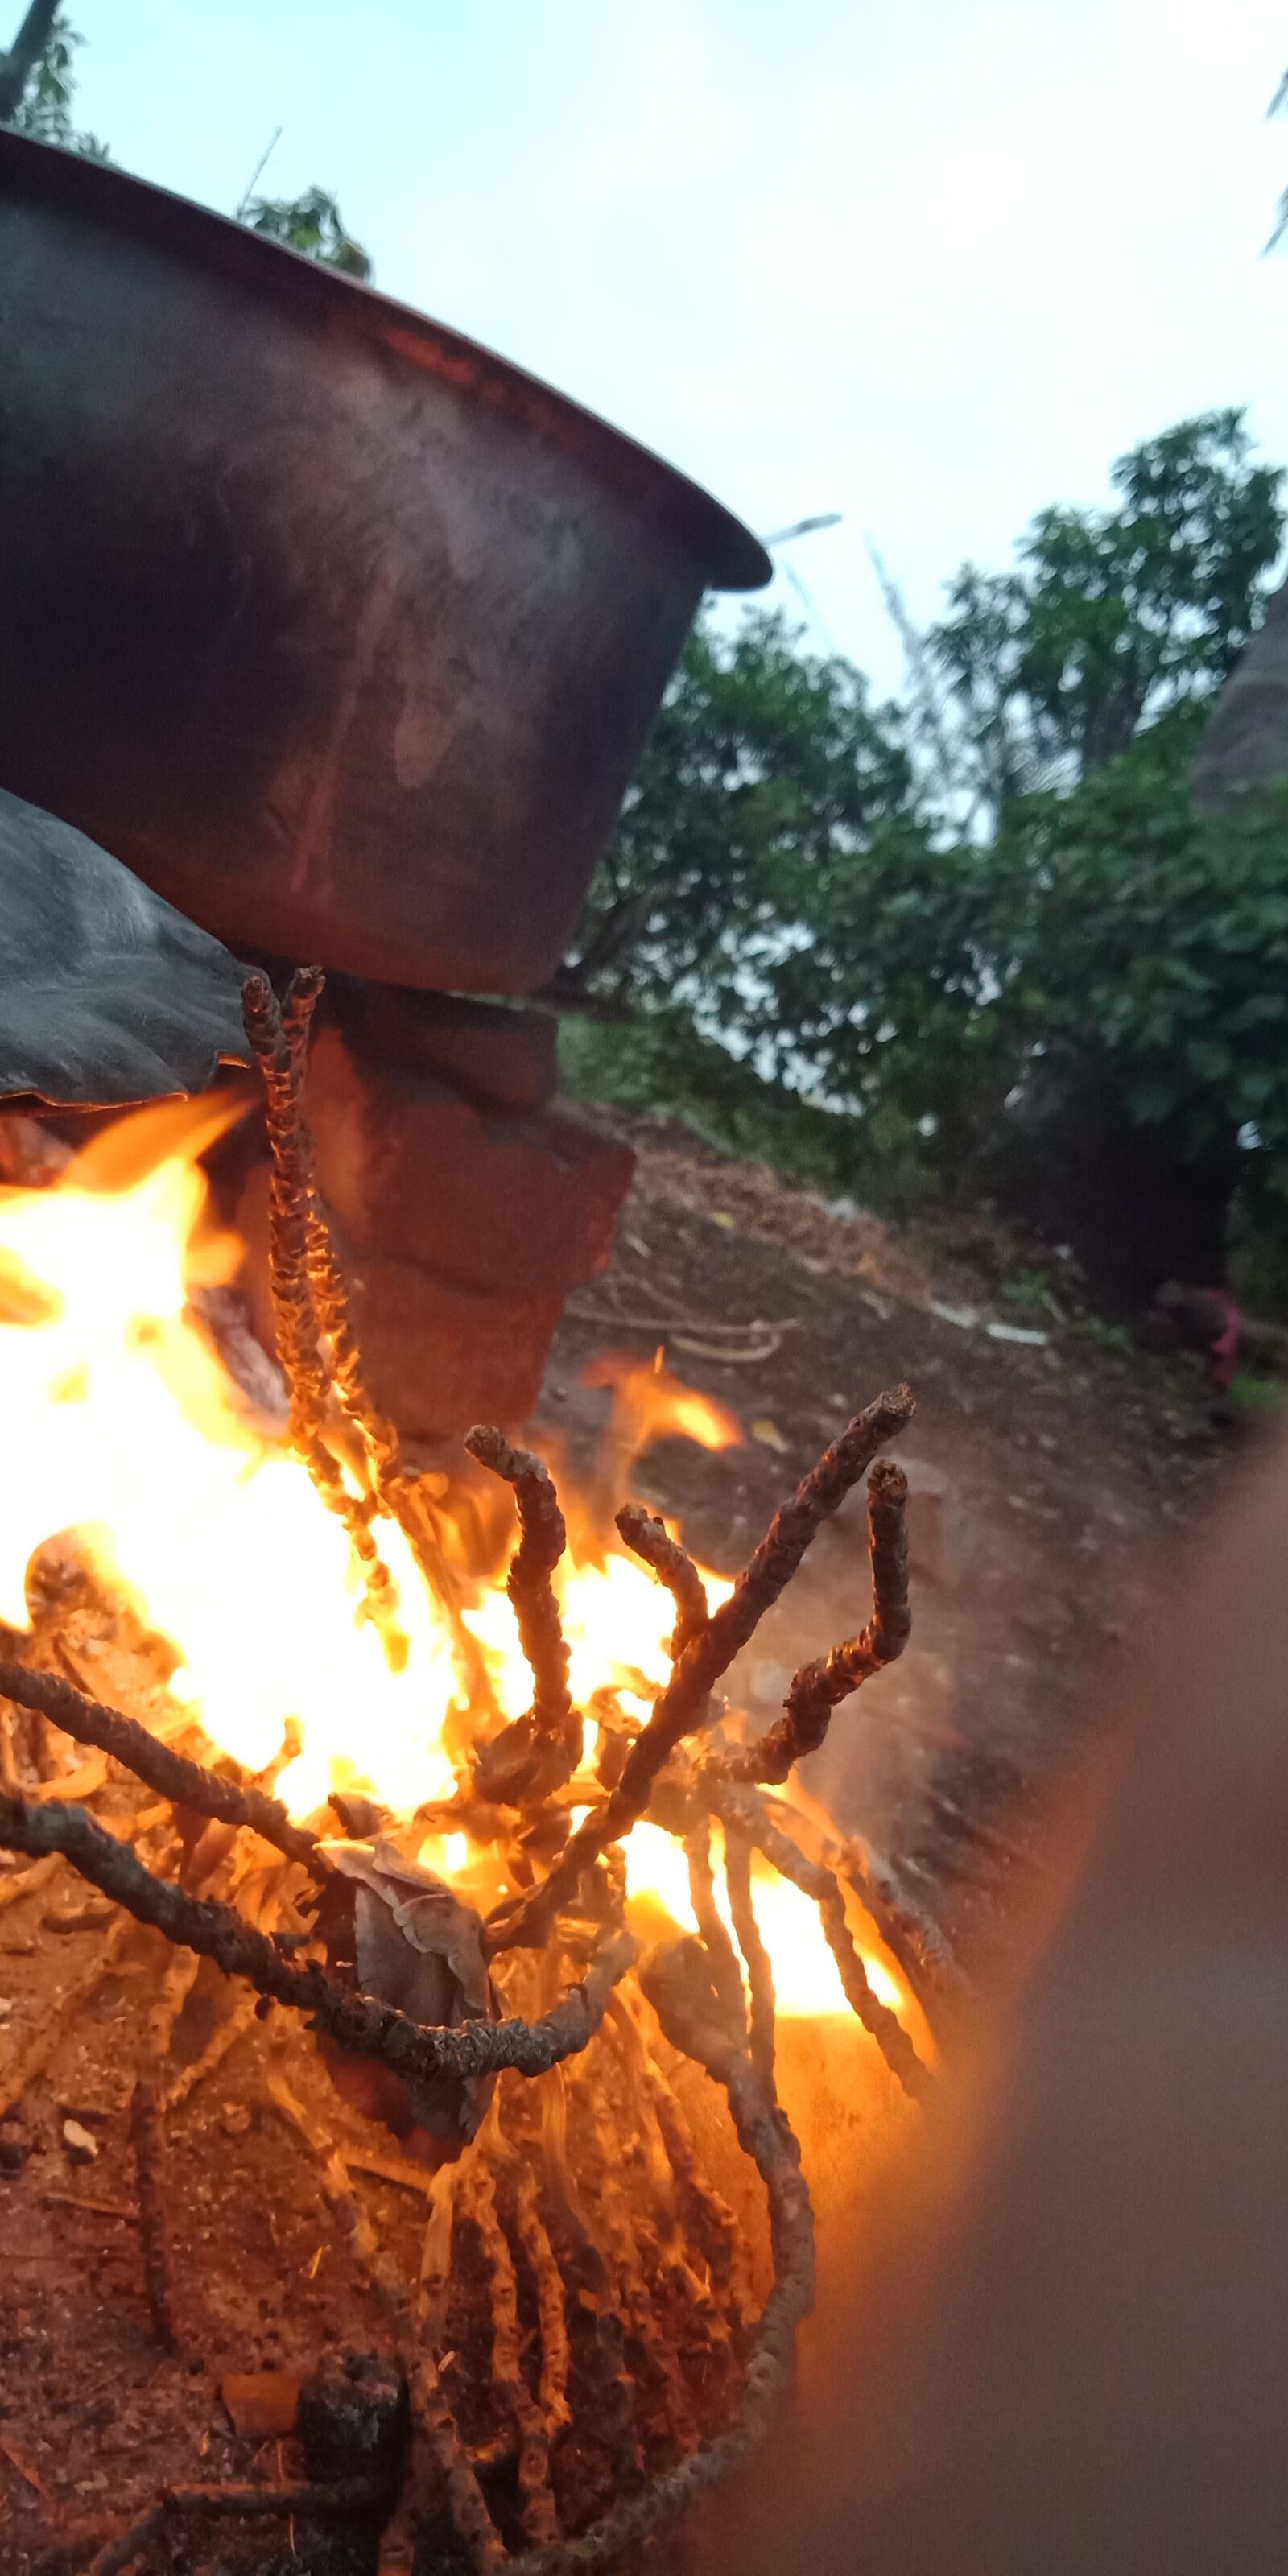 OPPO A83 sample photo. Fire, nature, mood photography